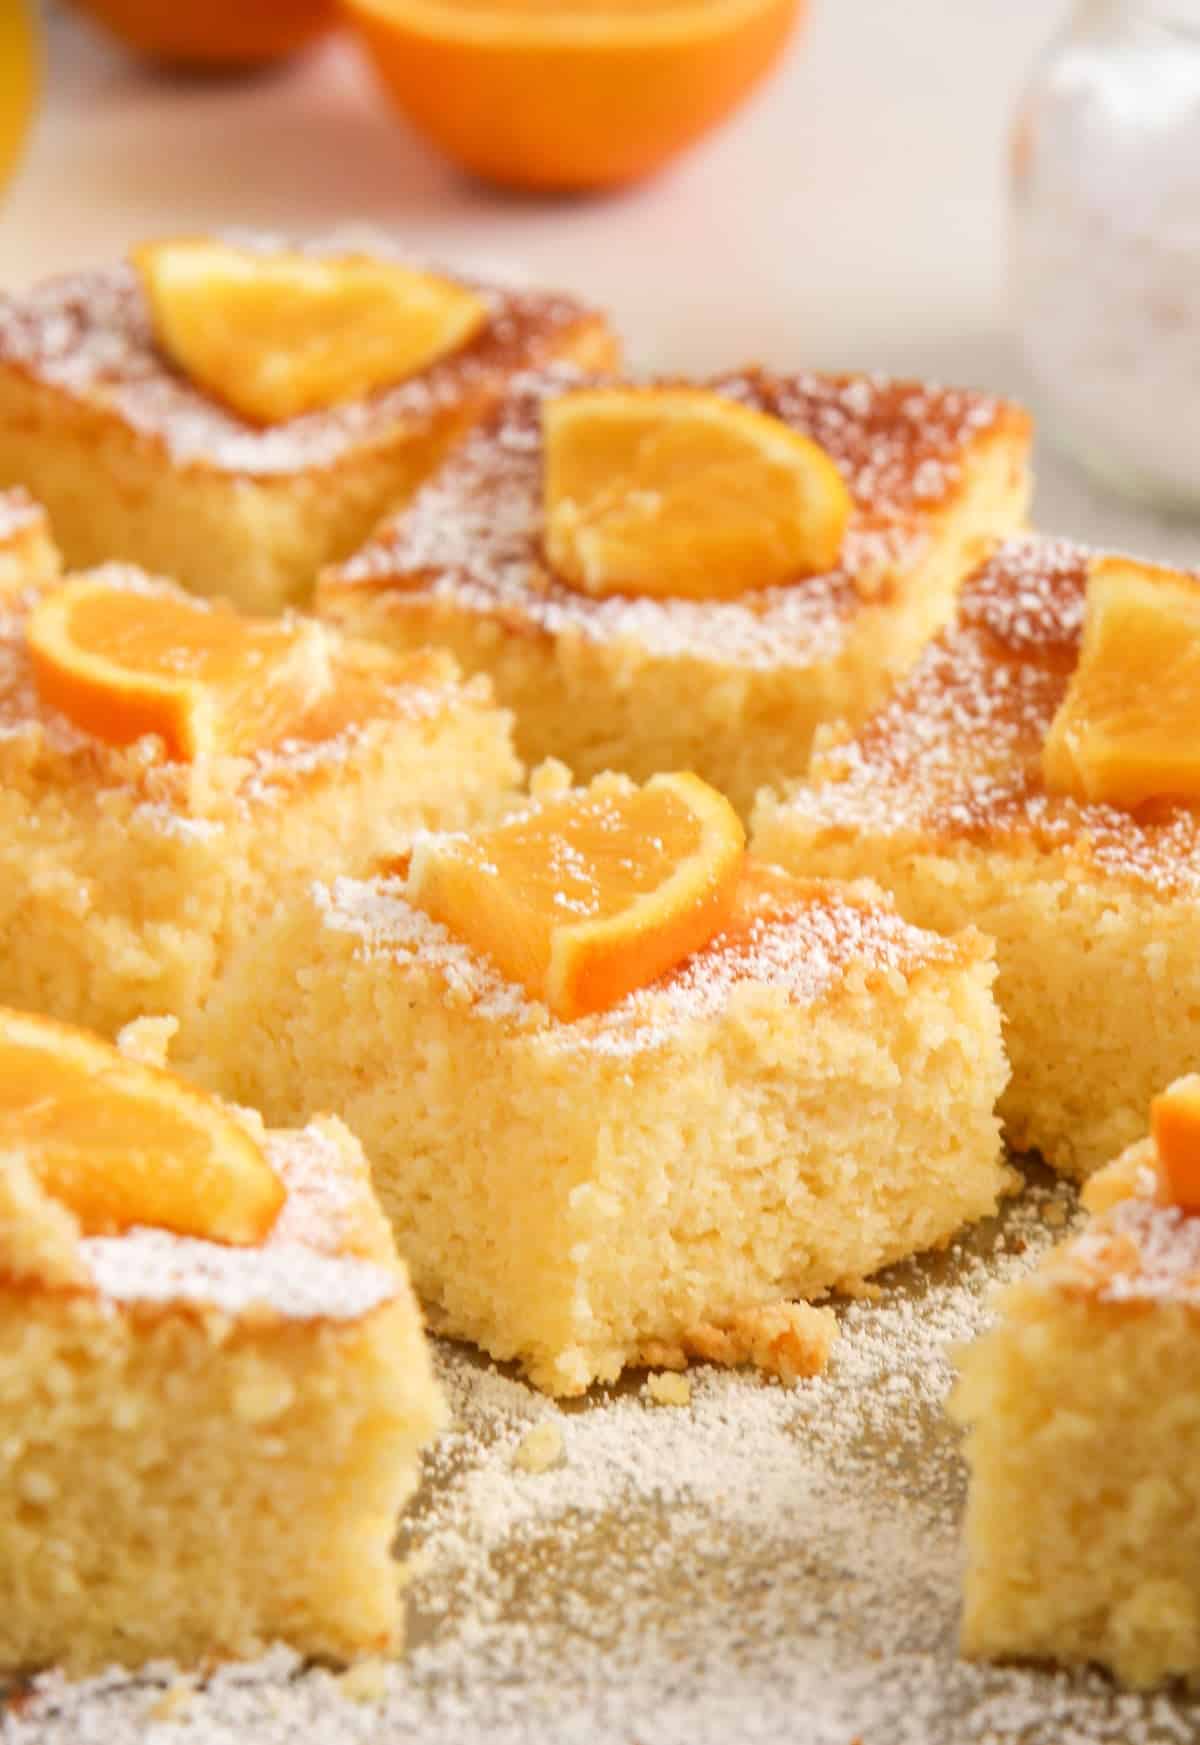 small cake pieces decorated with orange slicing and icing sugar.